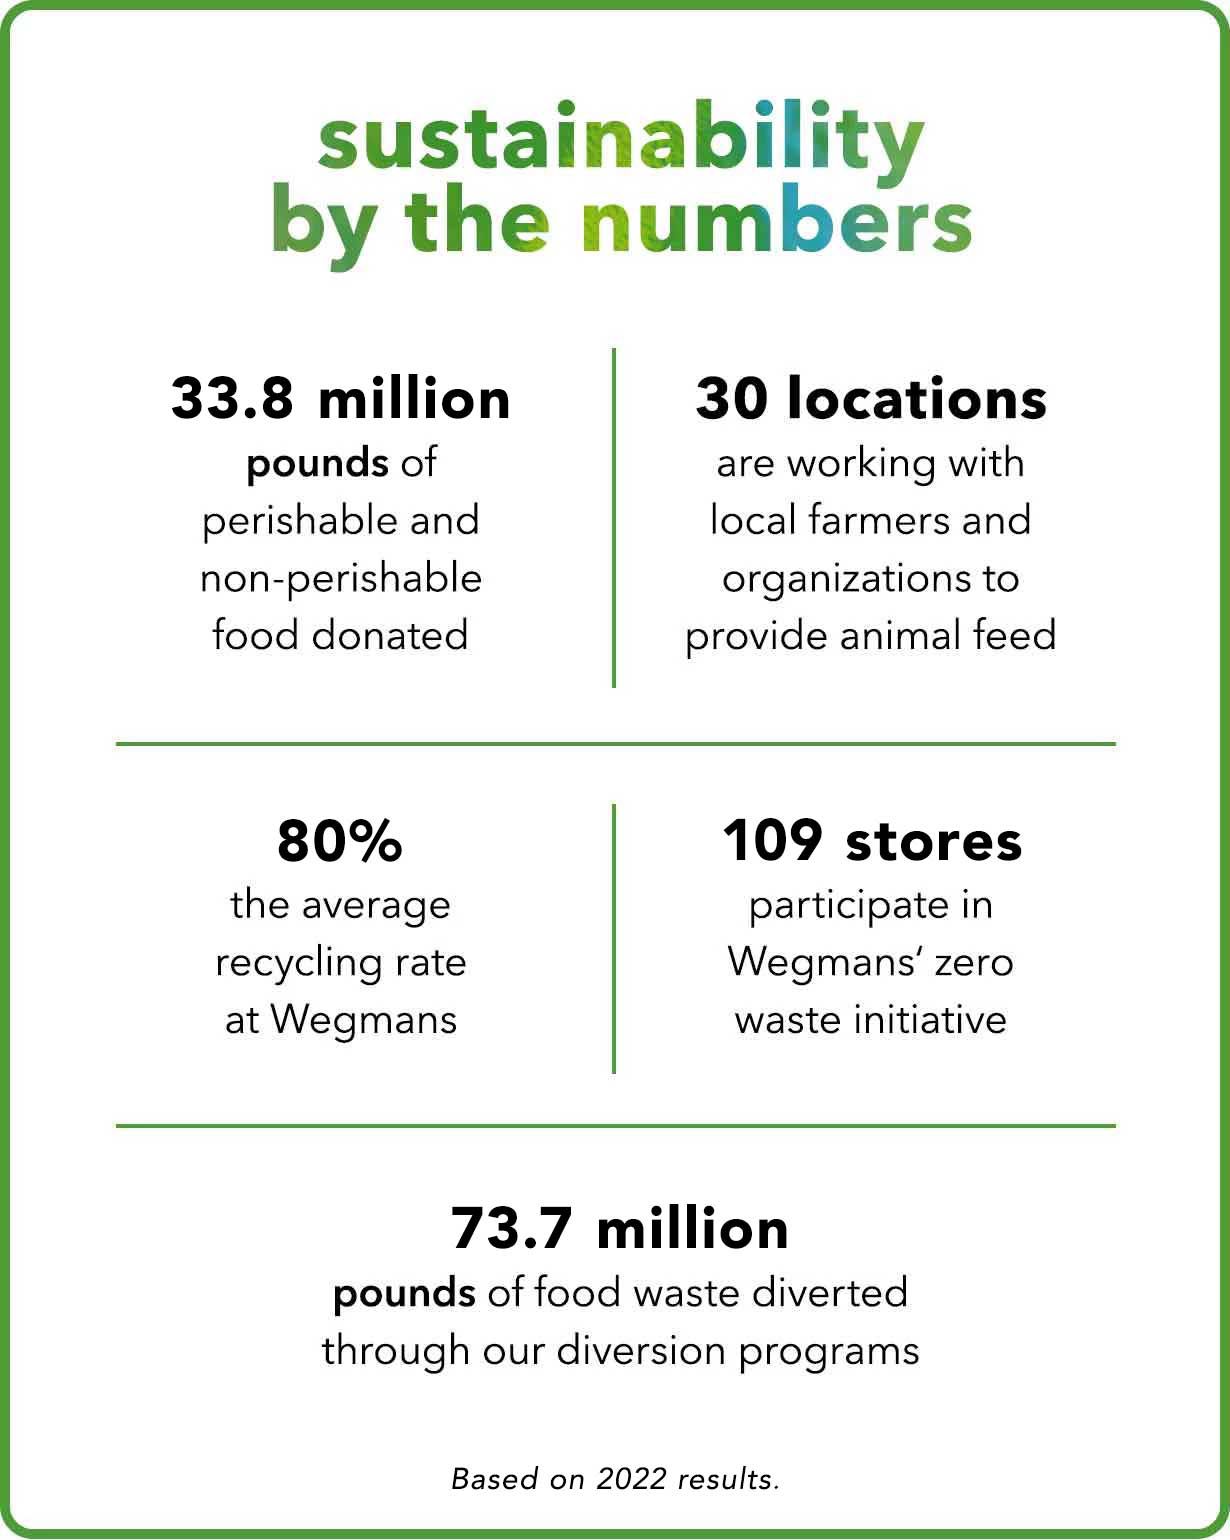 Chart with numerical data on Wegmans' food waste reduction efforts